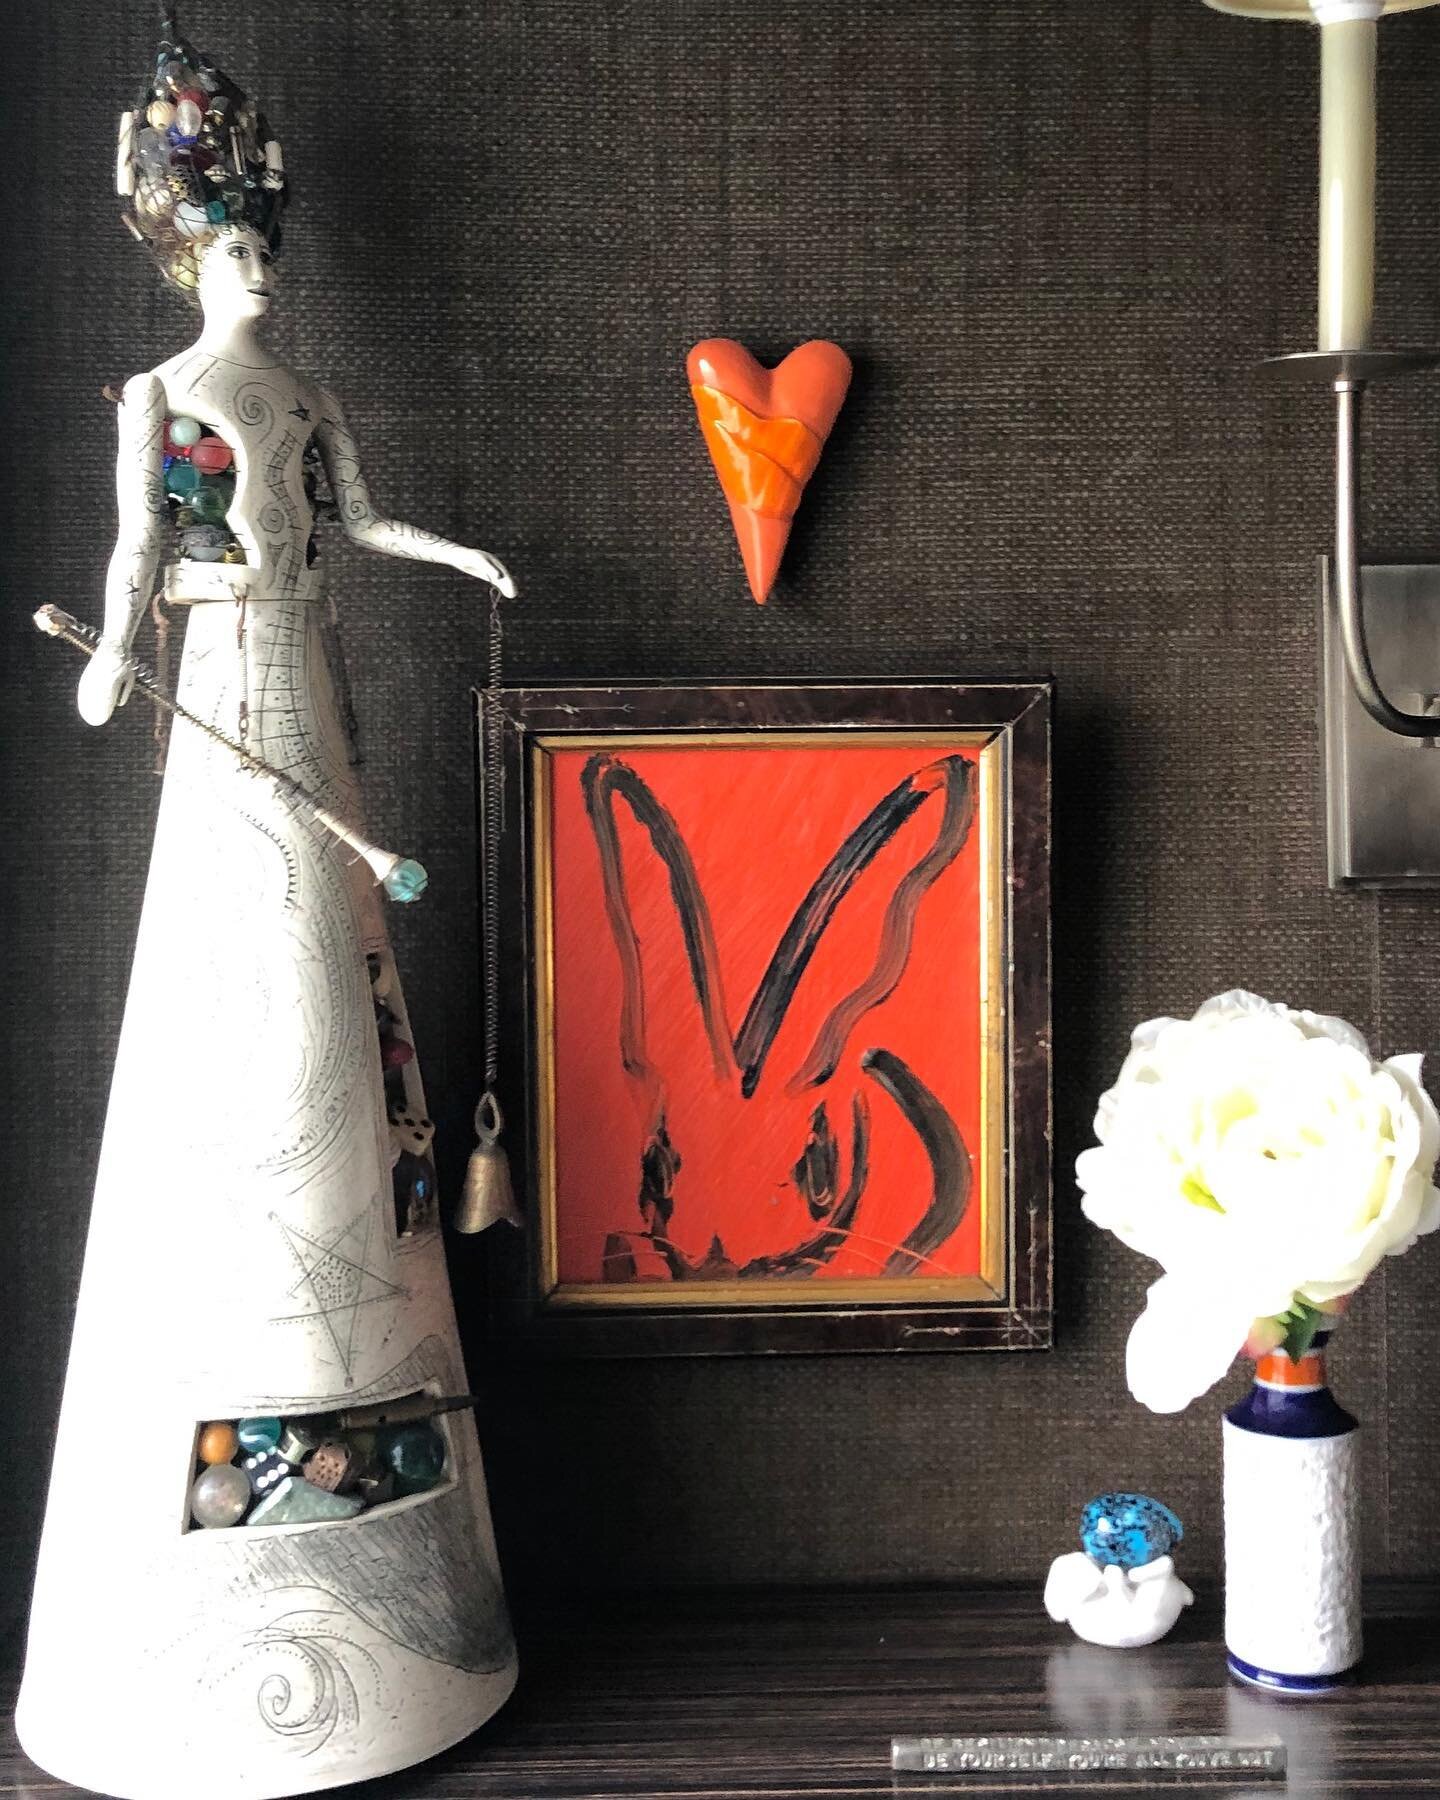 Happy Easter, my Love Bunnies!!! Be yourself - You&rsquo;re all you got
Some favorites that inspire me.
#huntslonem #valeriebunnell #marileehallceramics  ceramic bunny with egg a childhood collectable, mid century vase from my collection. #blakewoods